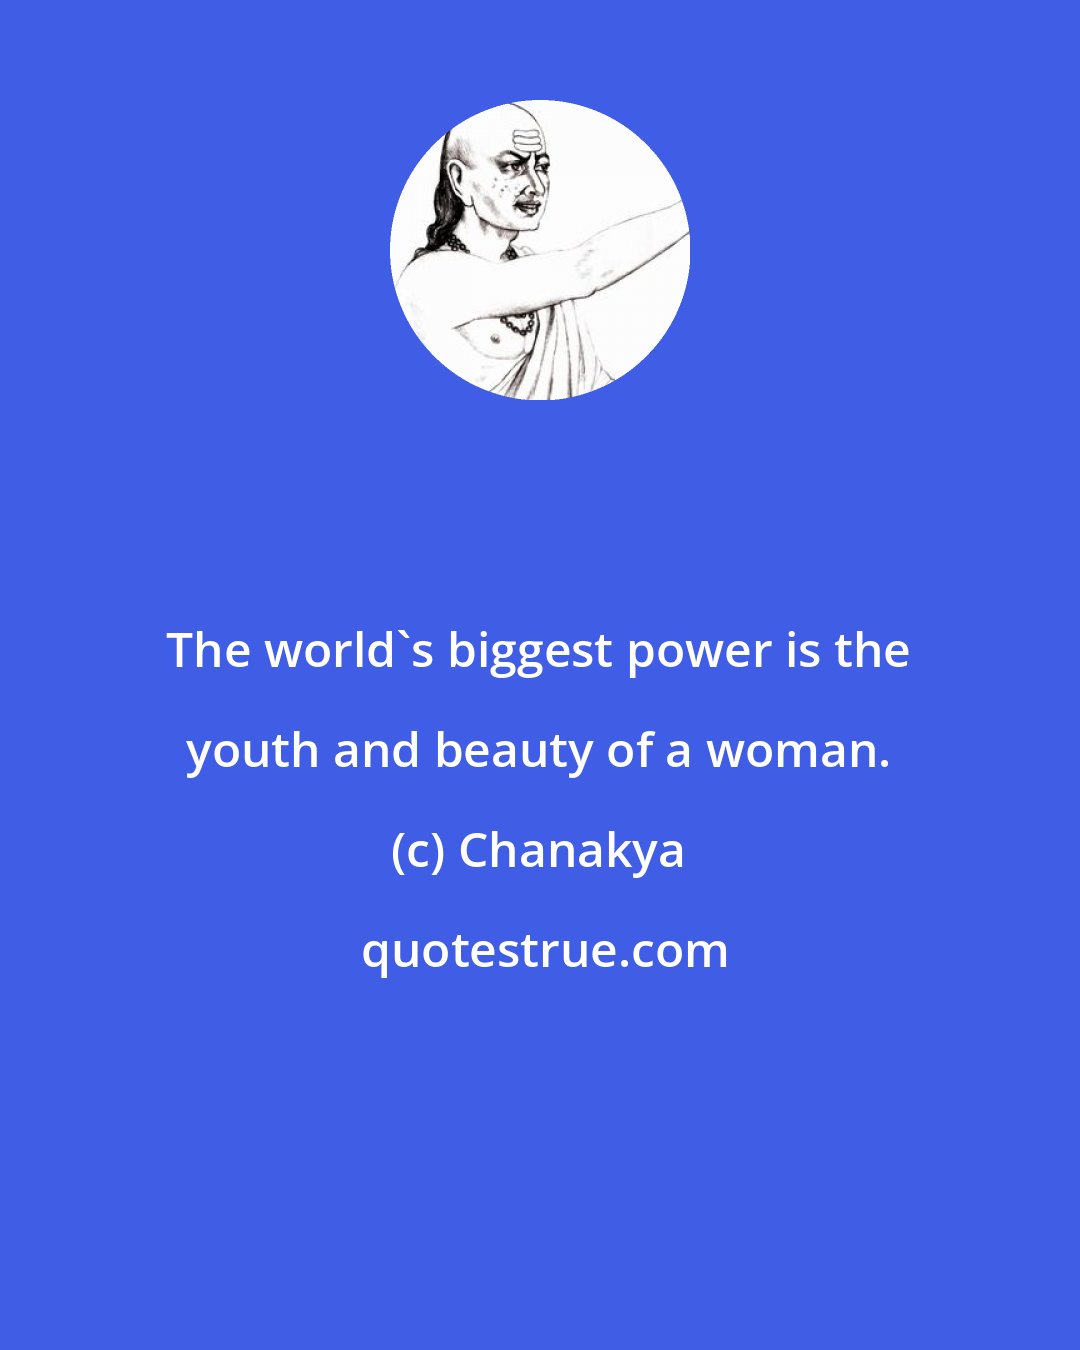 Chanakya: The world's biggest power is the youth and beauty of a woman.